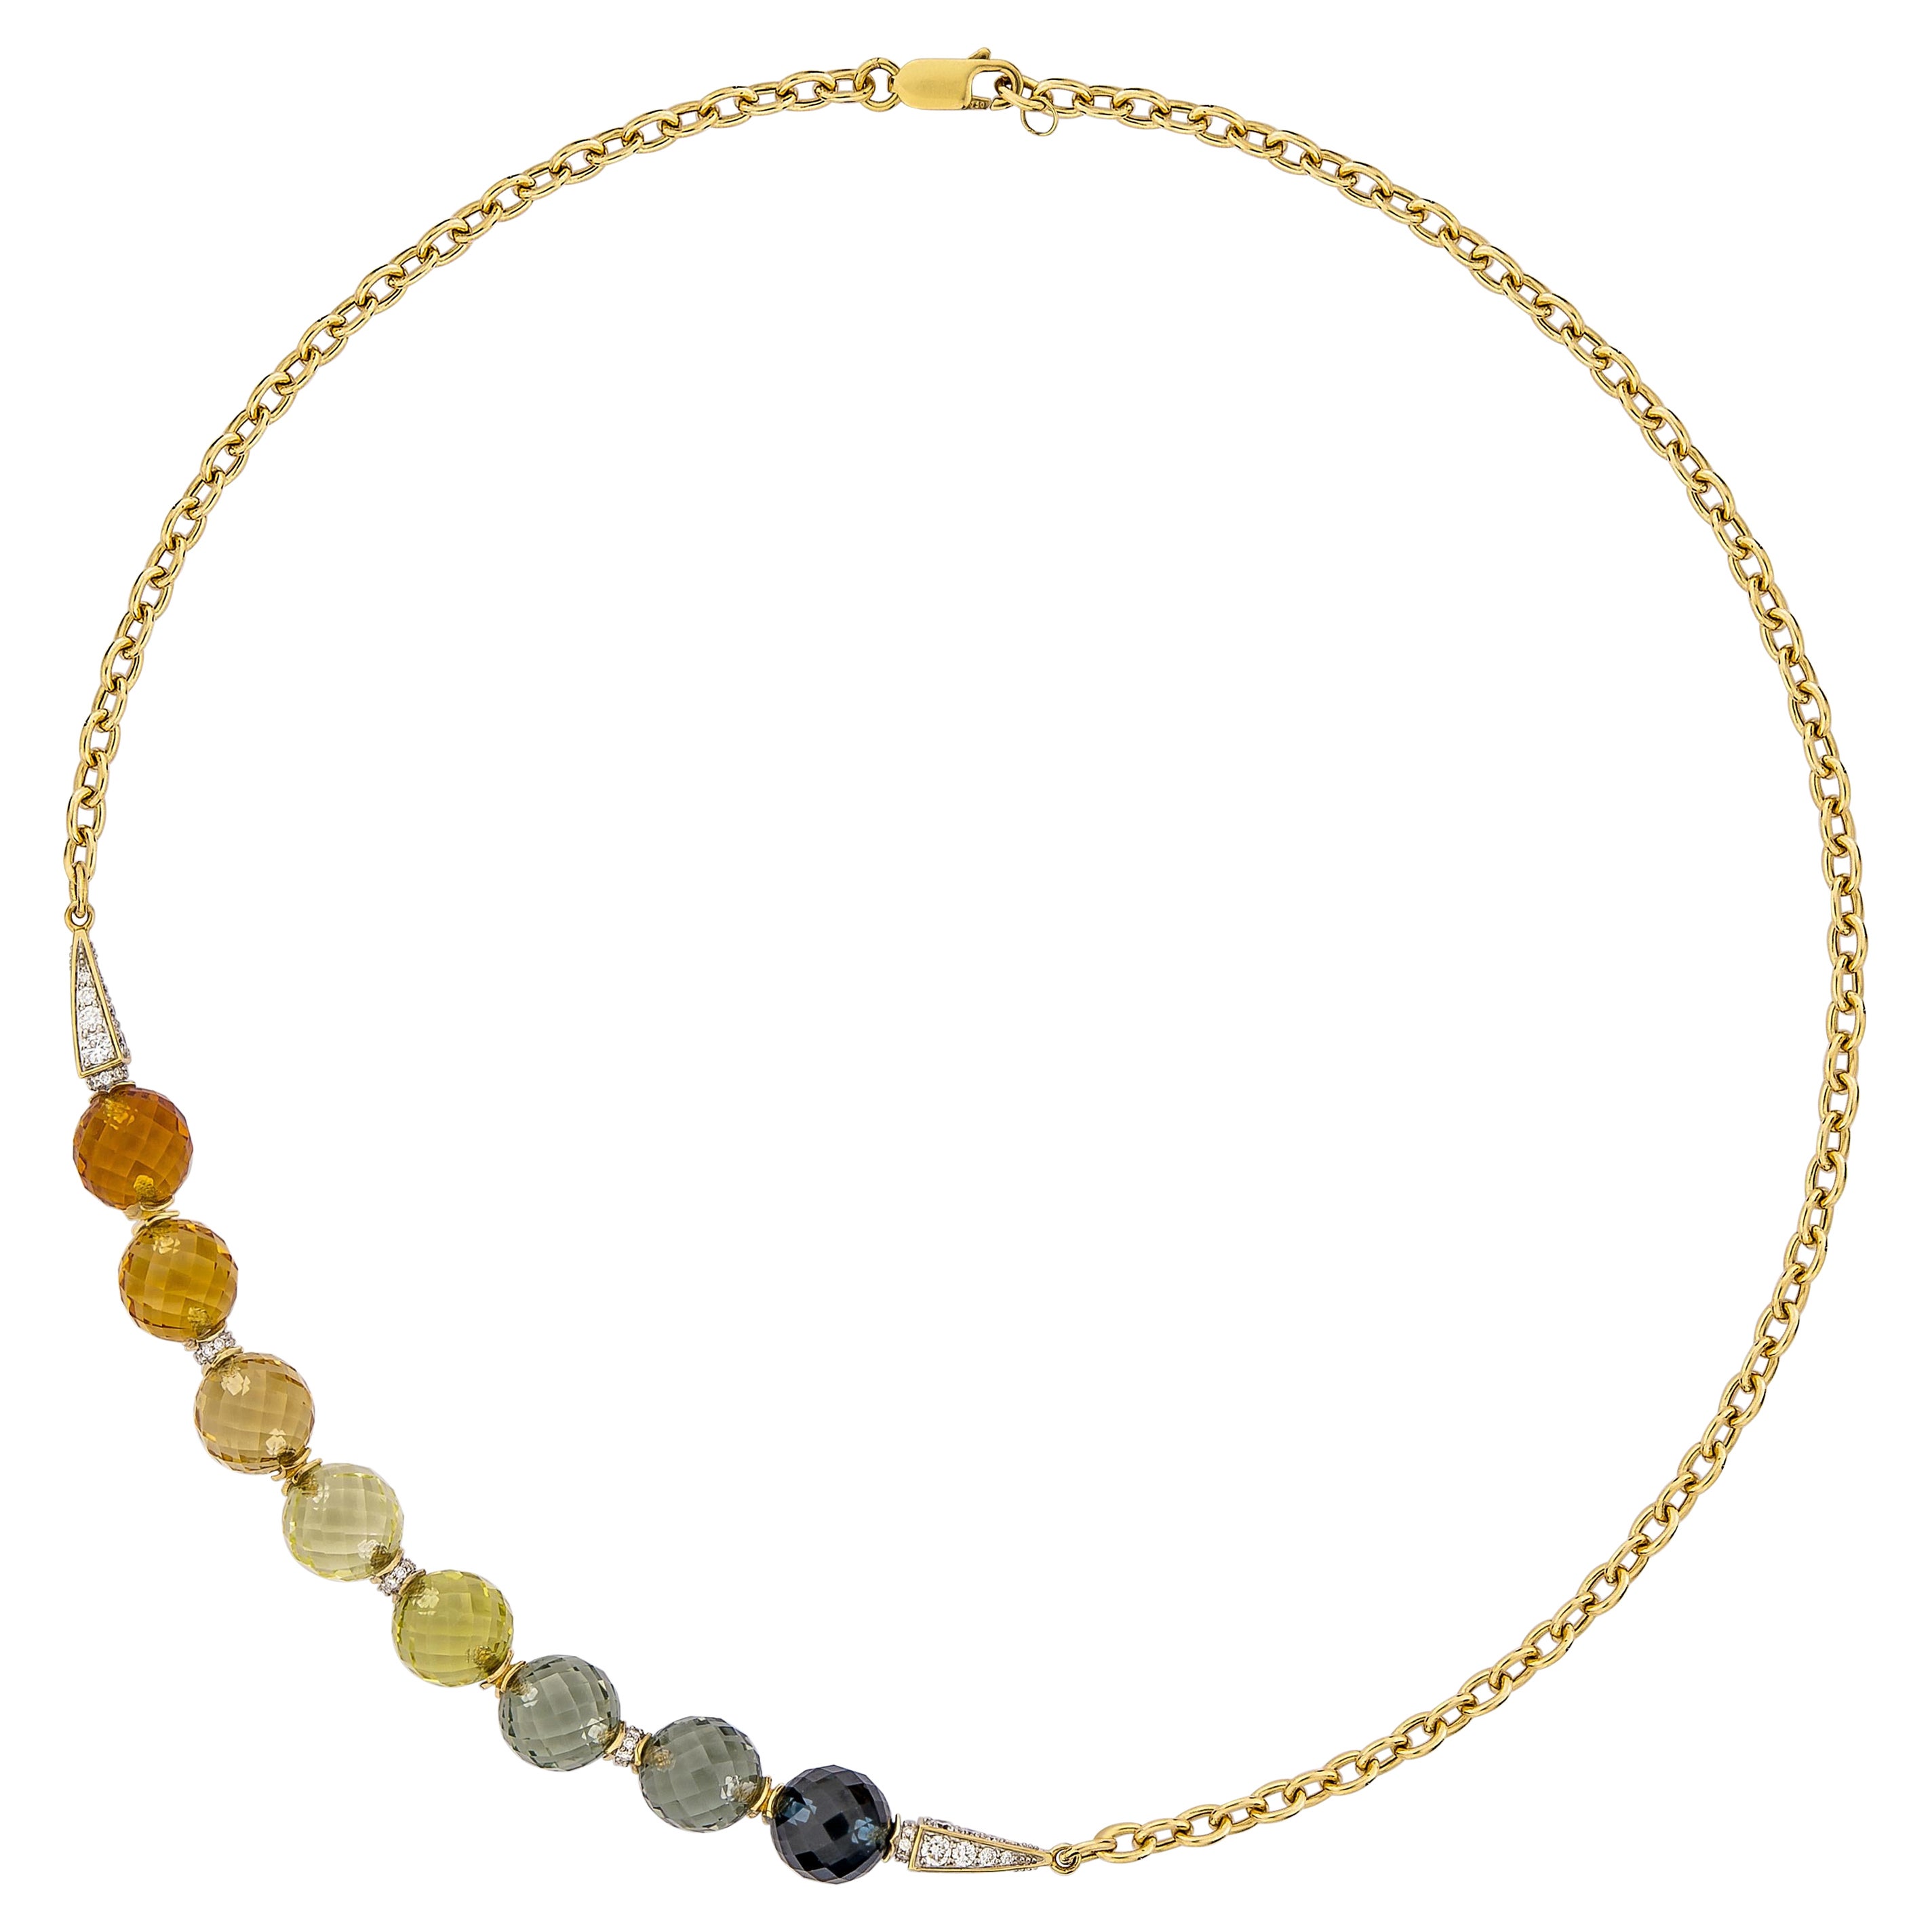 Multi Gemstone Beads Twilight Necklace in 18 Karat Yellow Gold For Sale